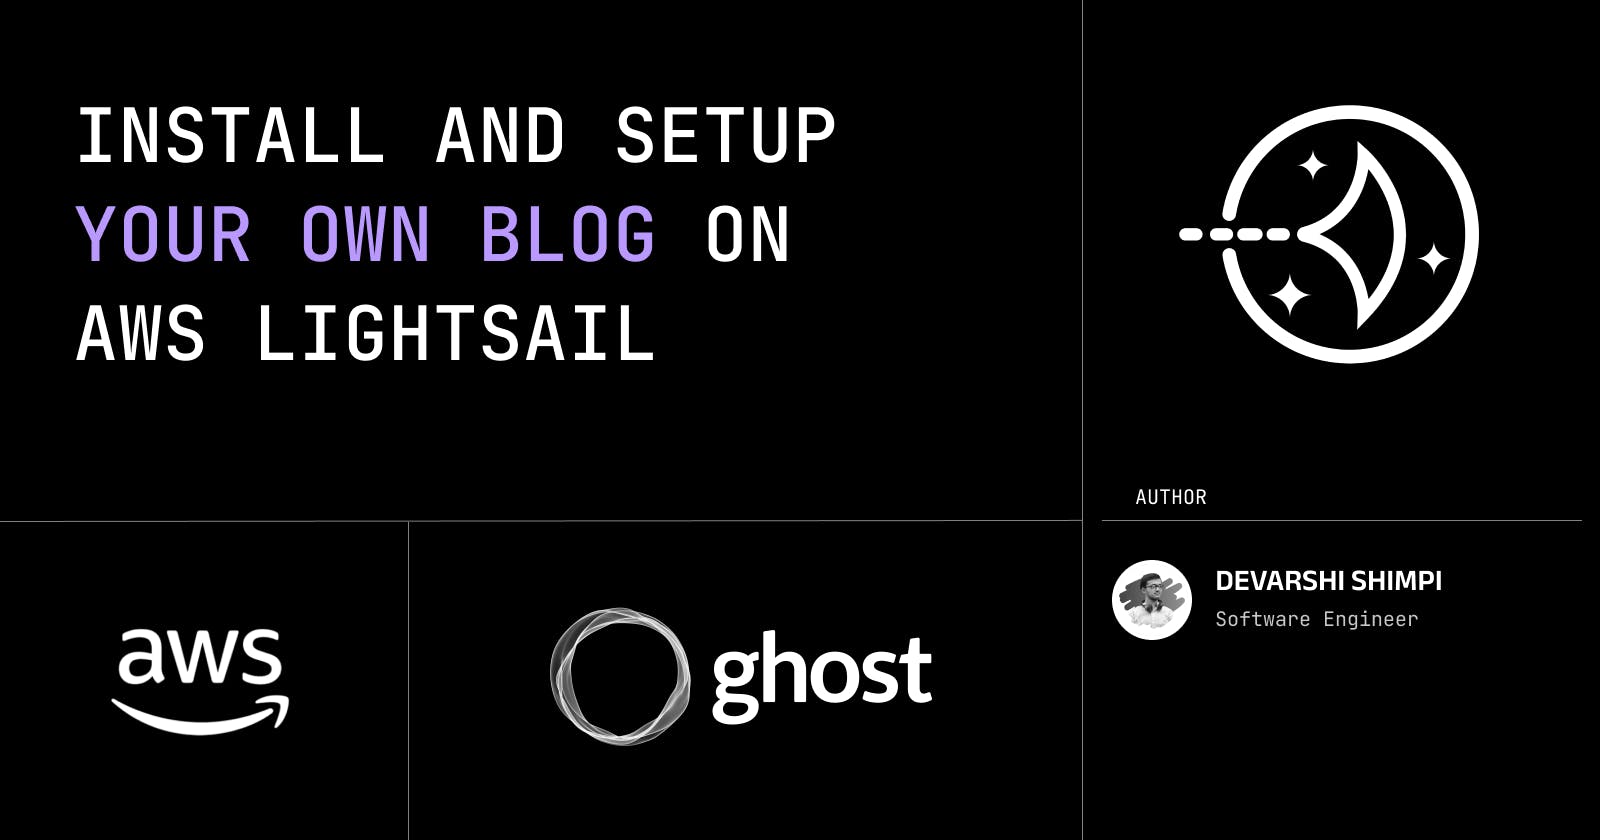 How to Install and Set Up a Ghost Blog on AWS Lightsail - Step by Step Tutorial